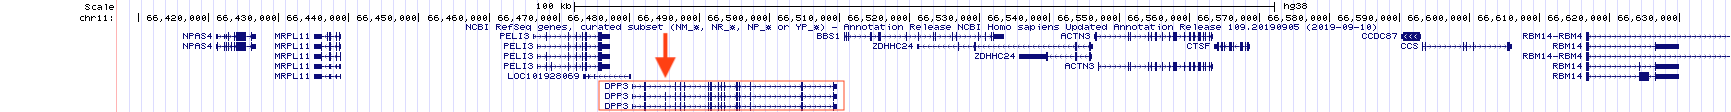 Notice how DPP3, highlighted with a red box, begins and ends transcription at the same location but the RNA transcript that is produced is spliced in three distinct ways to produce three alternative splice forms. One obvious difference is highlighted with a red arrow. The 2nd and 3rd splice forms have an exon not included in the topmost splice form listed. Click on the image to get a closer look. Click again to continue reading.